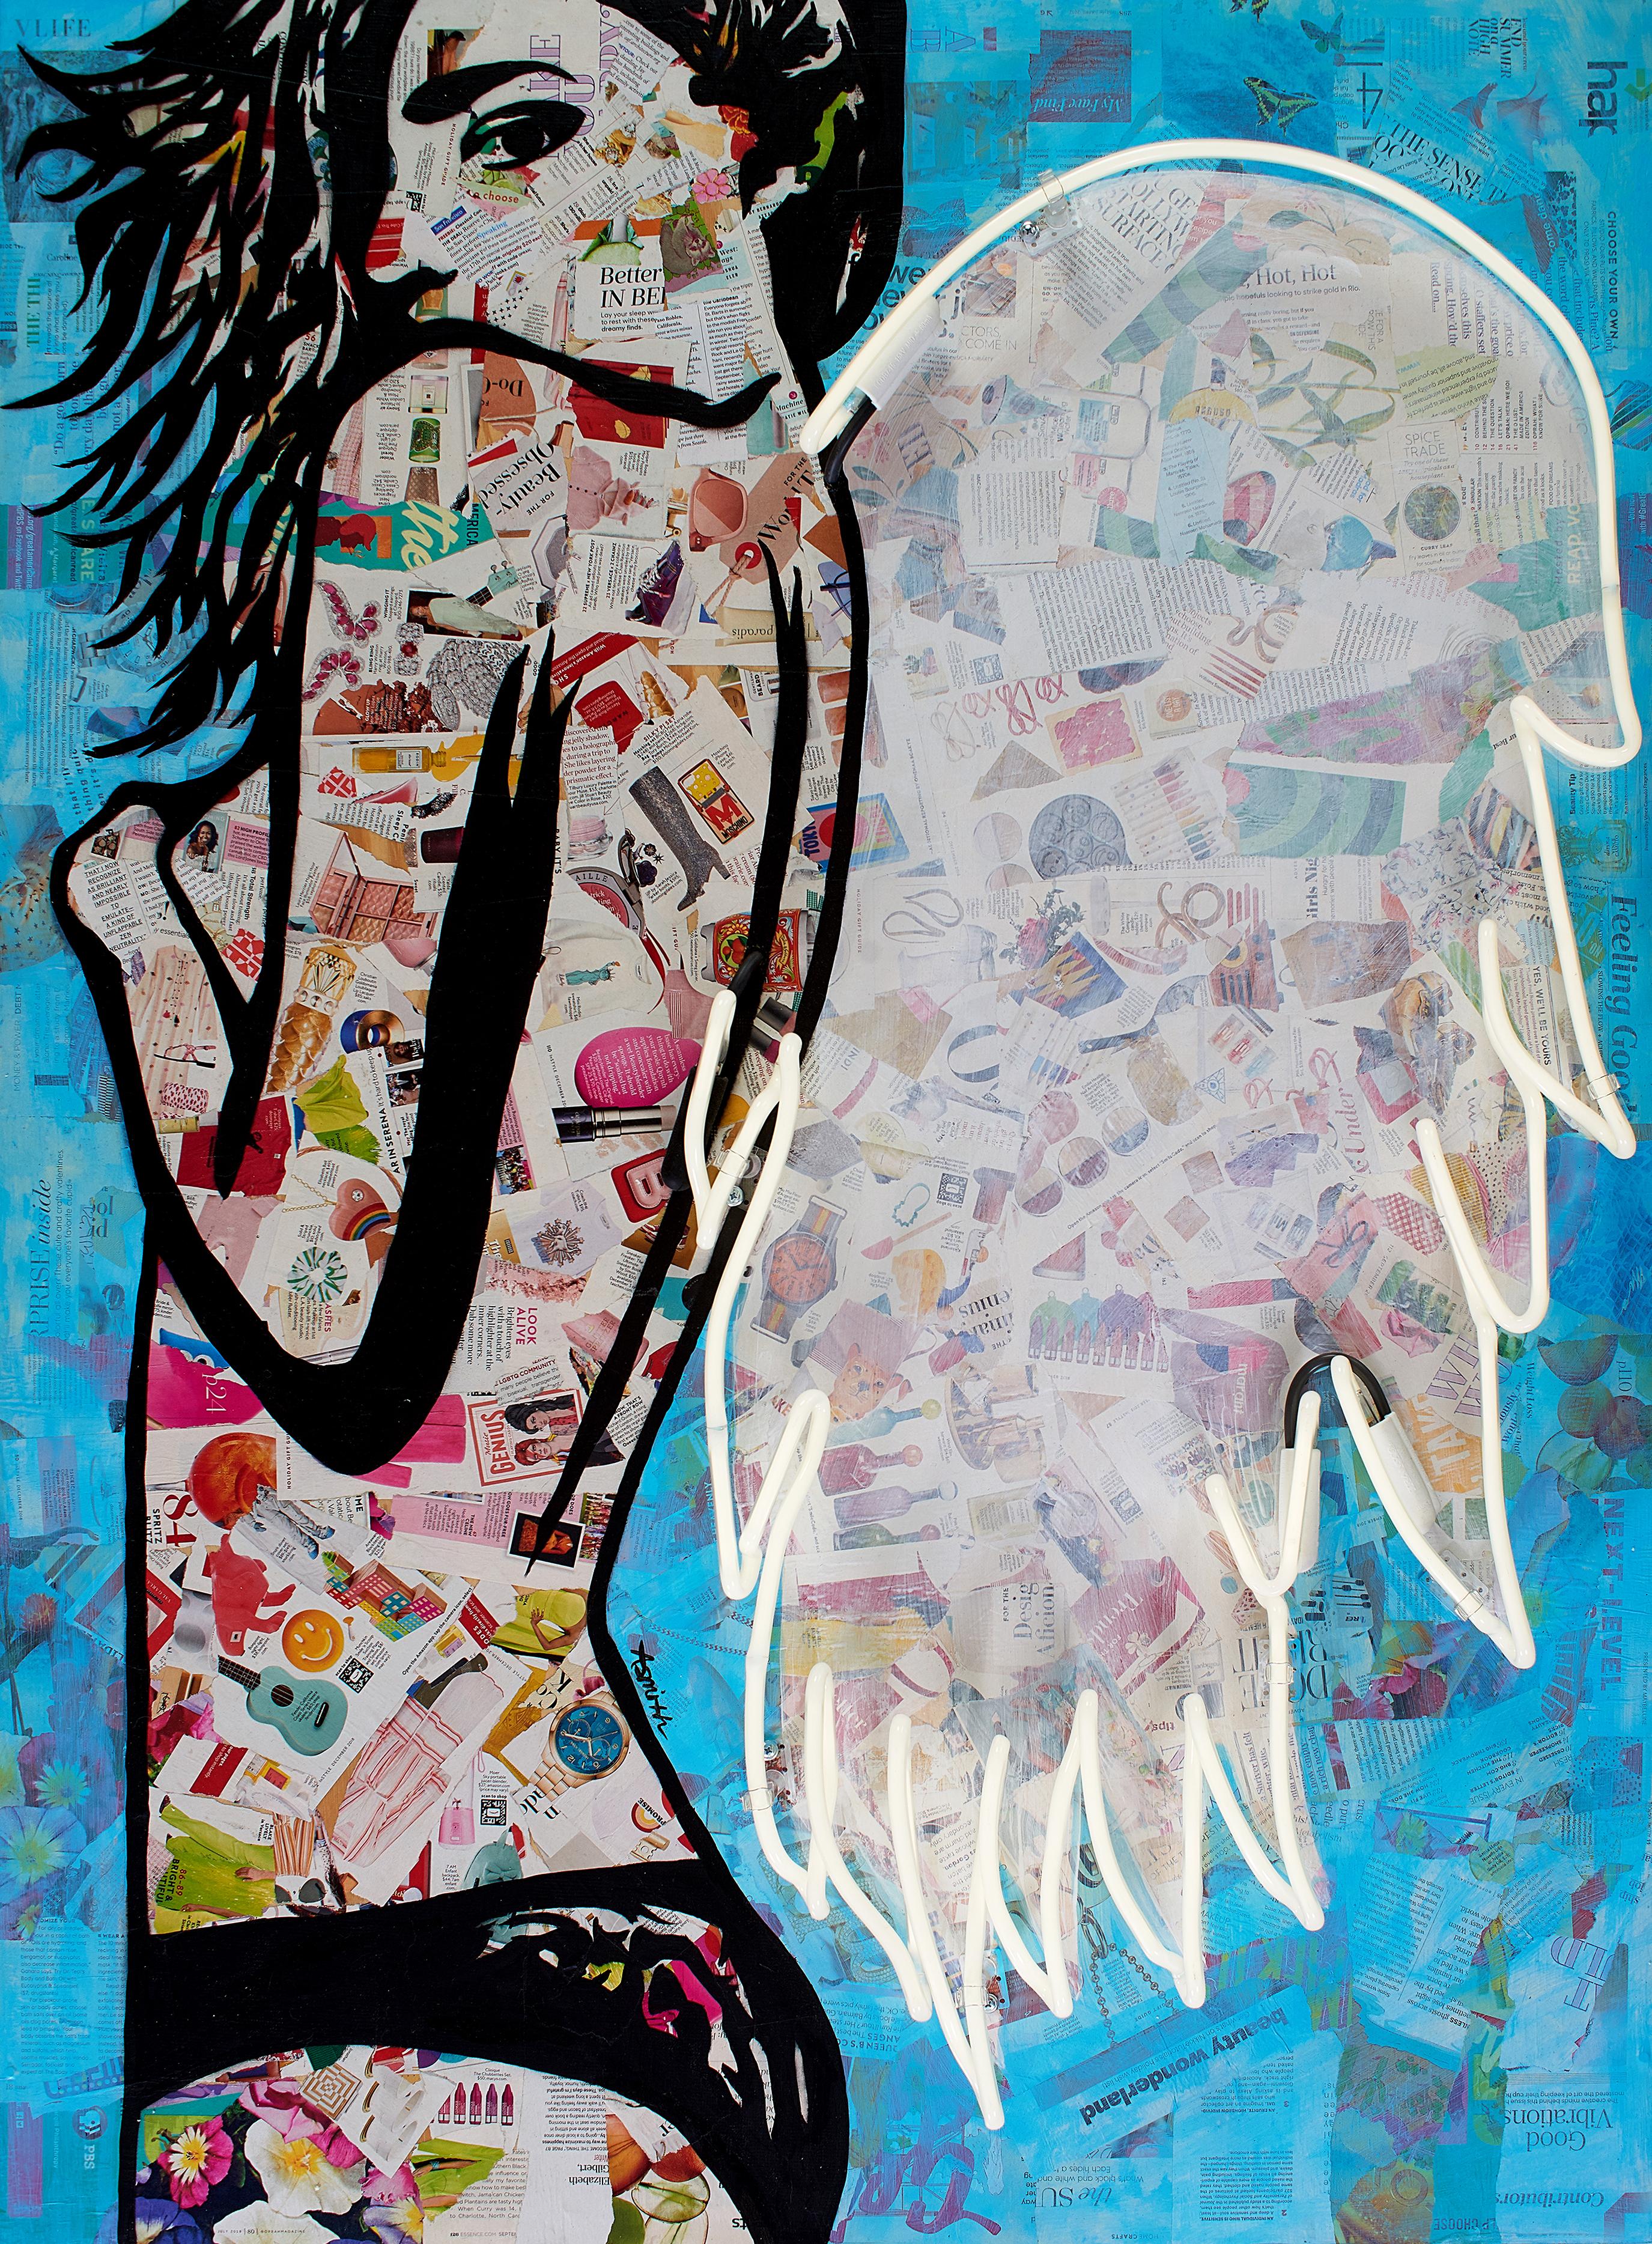 "Winged"-Mixed Media Collage, Stencil and Acrylic, with Neon, on Wood